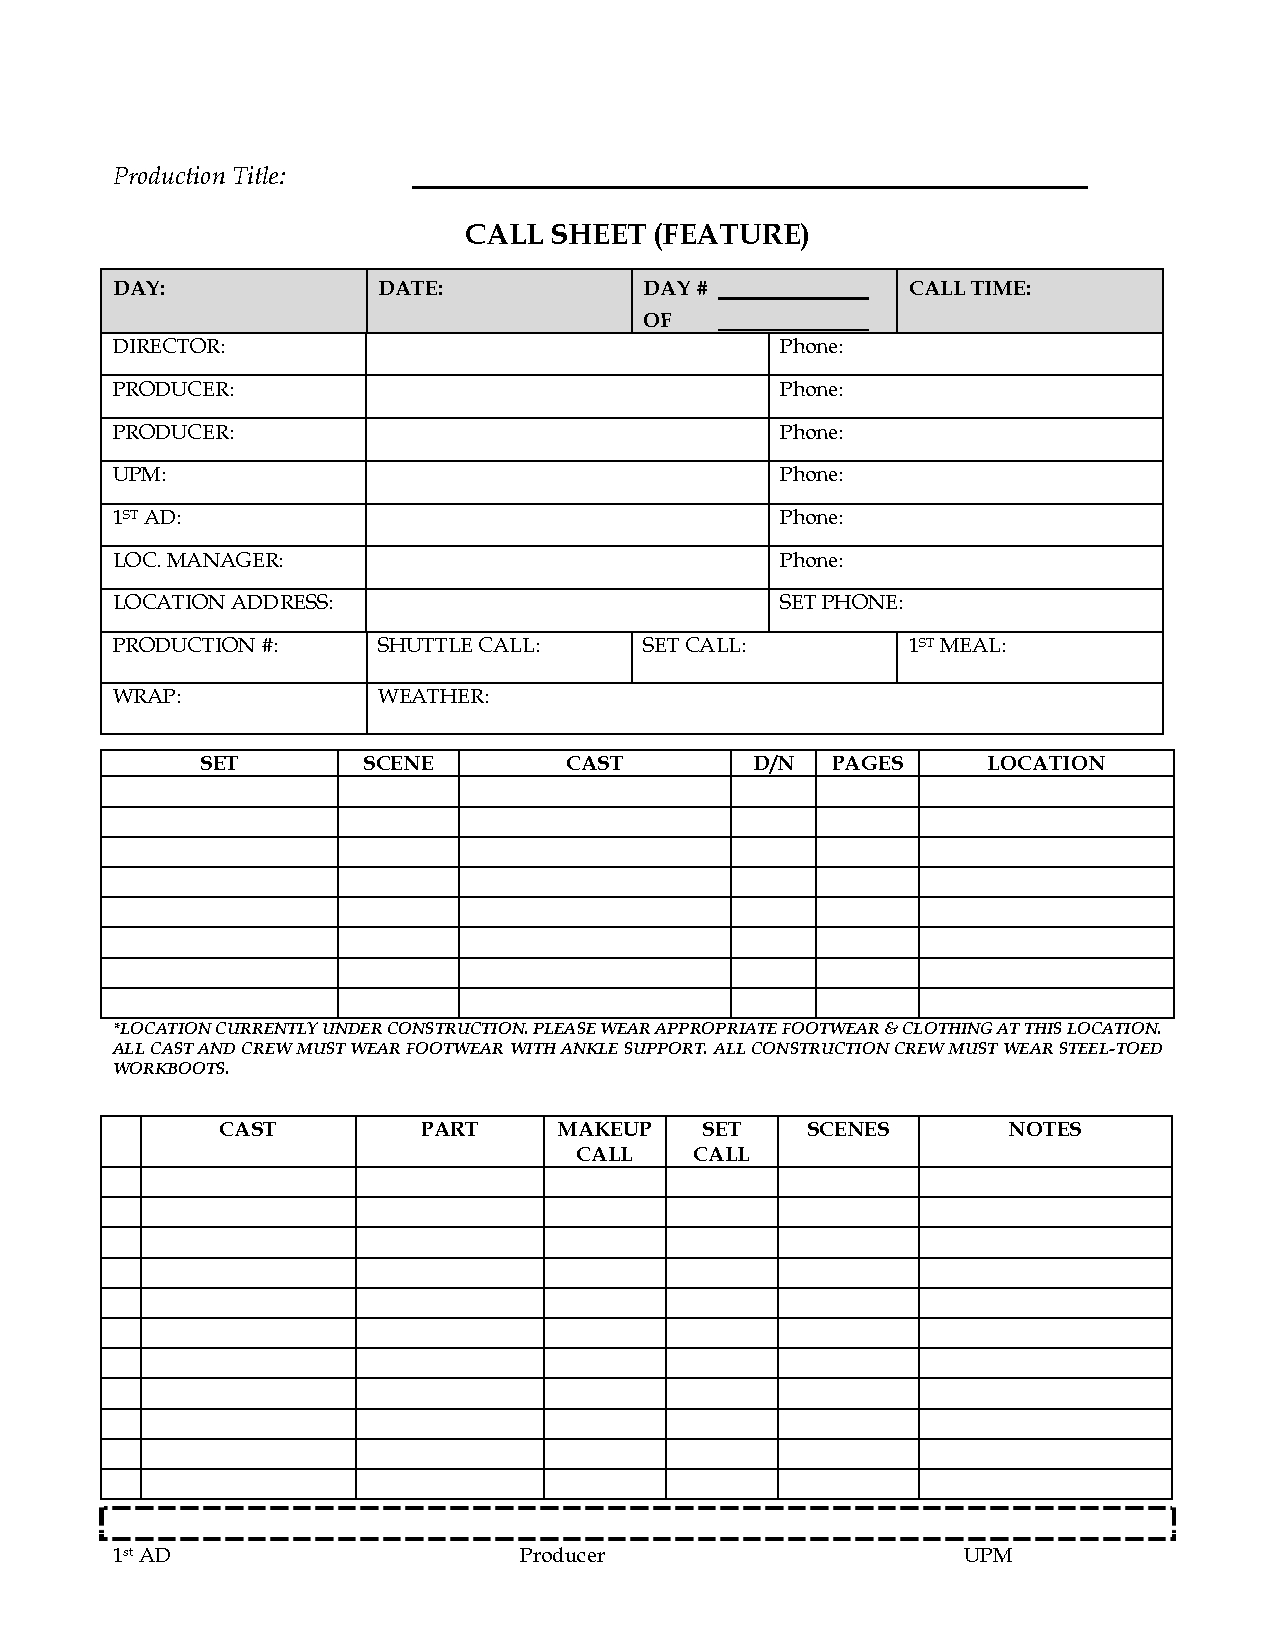 Awesome Call Sheet (Feature) Template Sample For Film Inside Blank Call Sheet Template